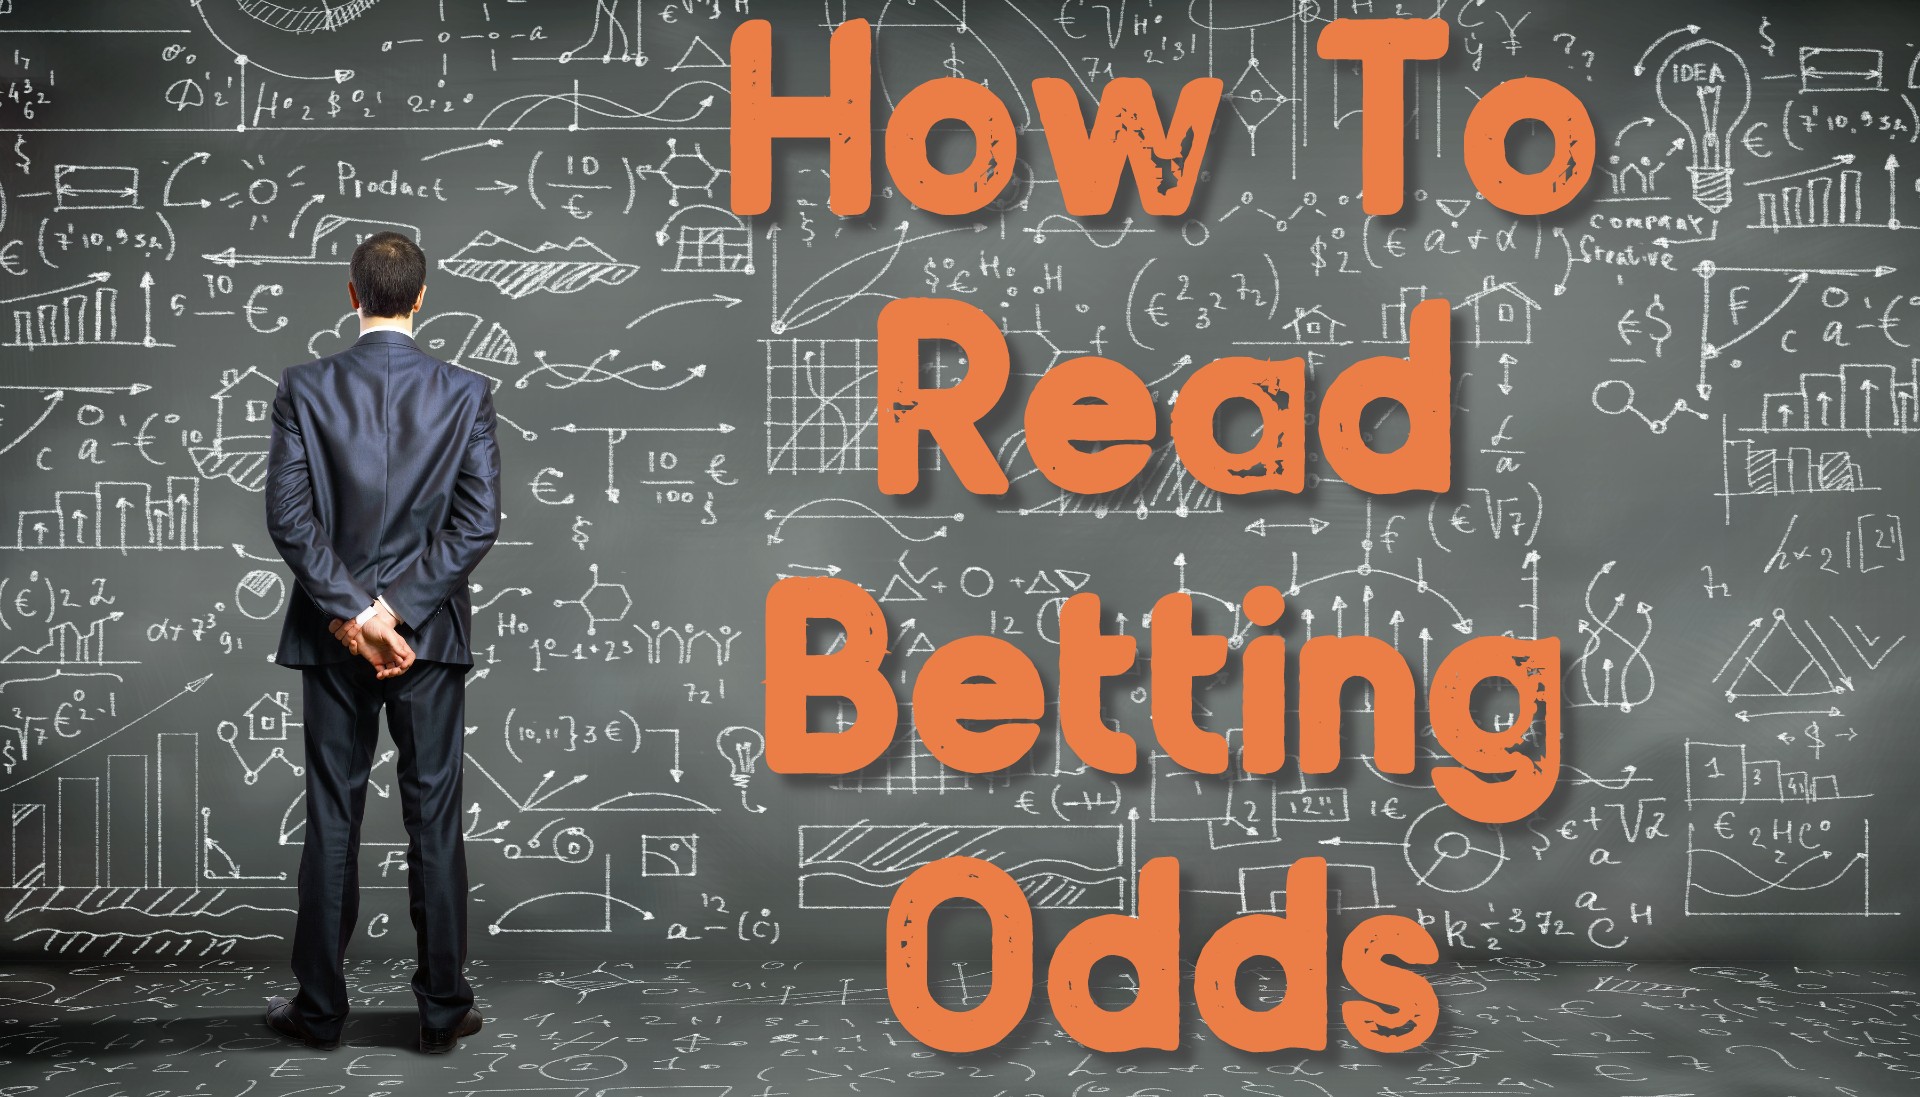 45 betting odds explained